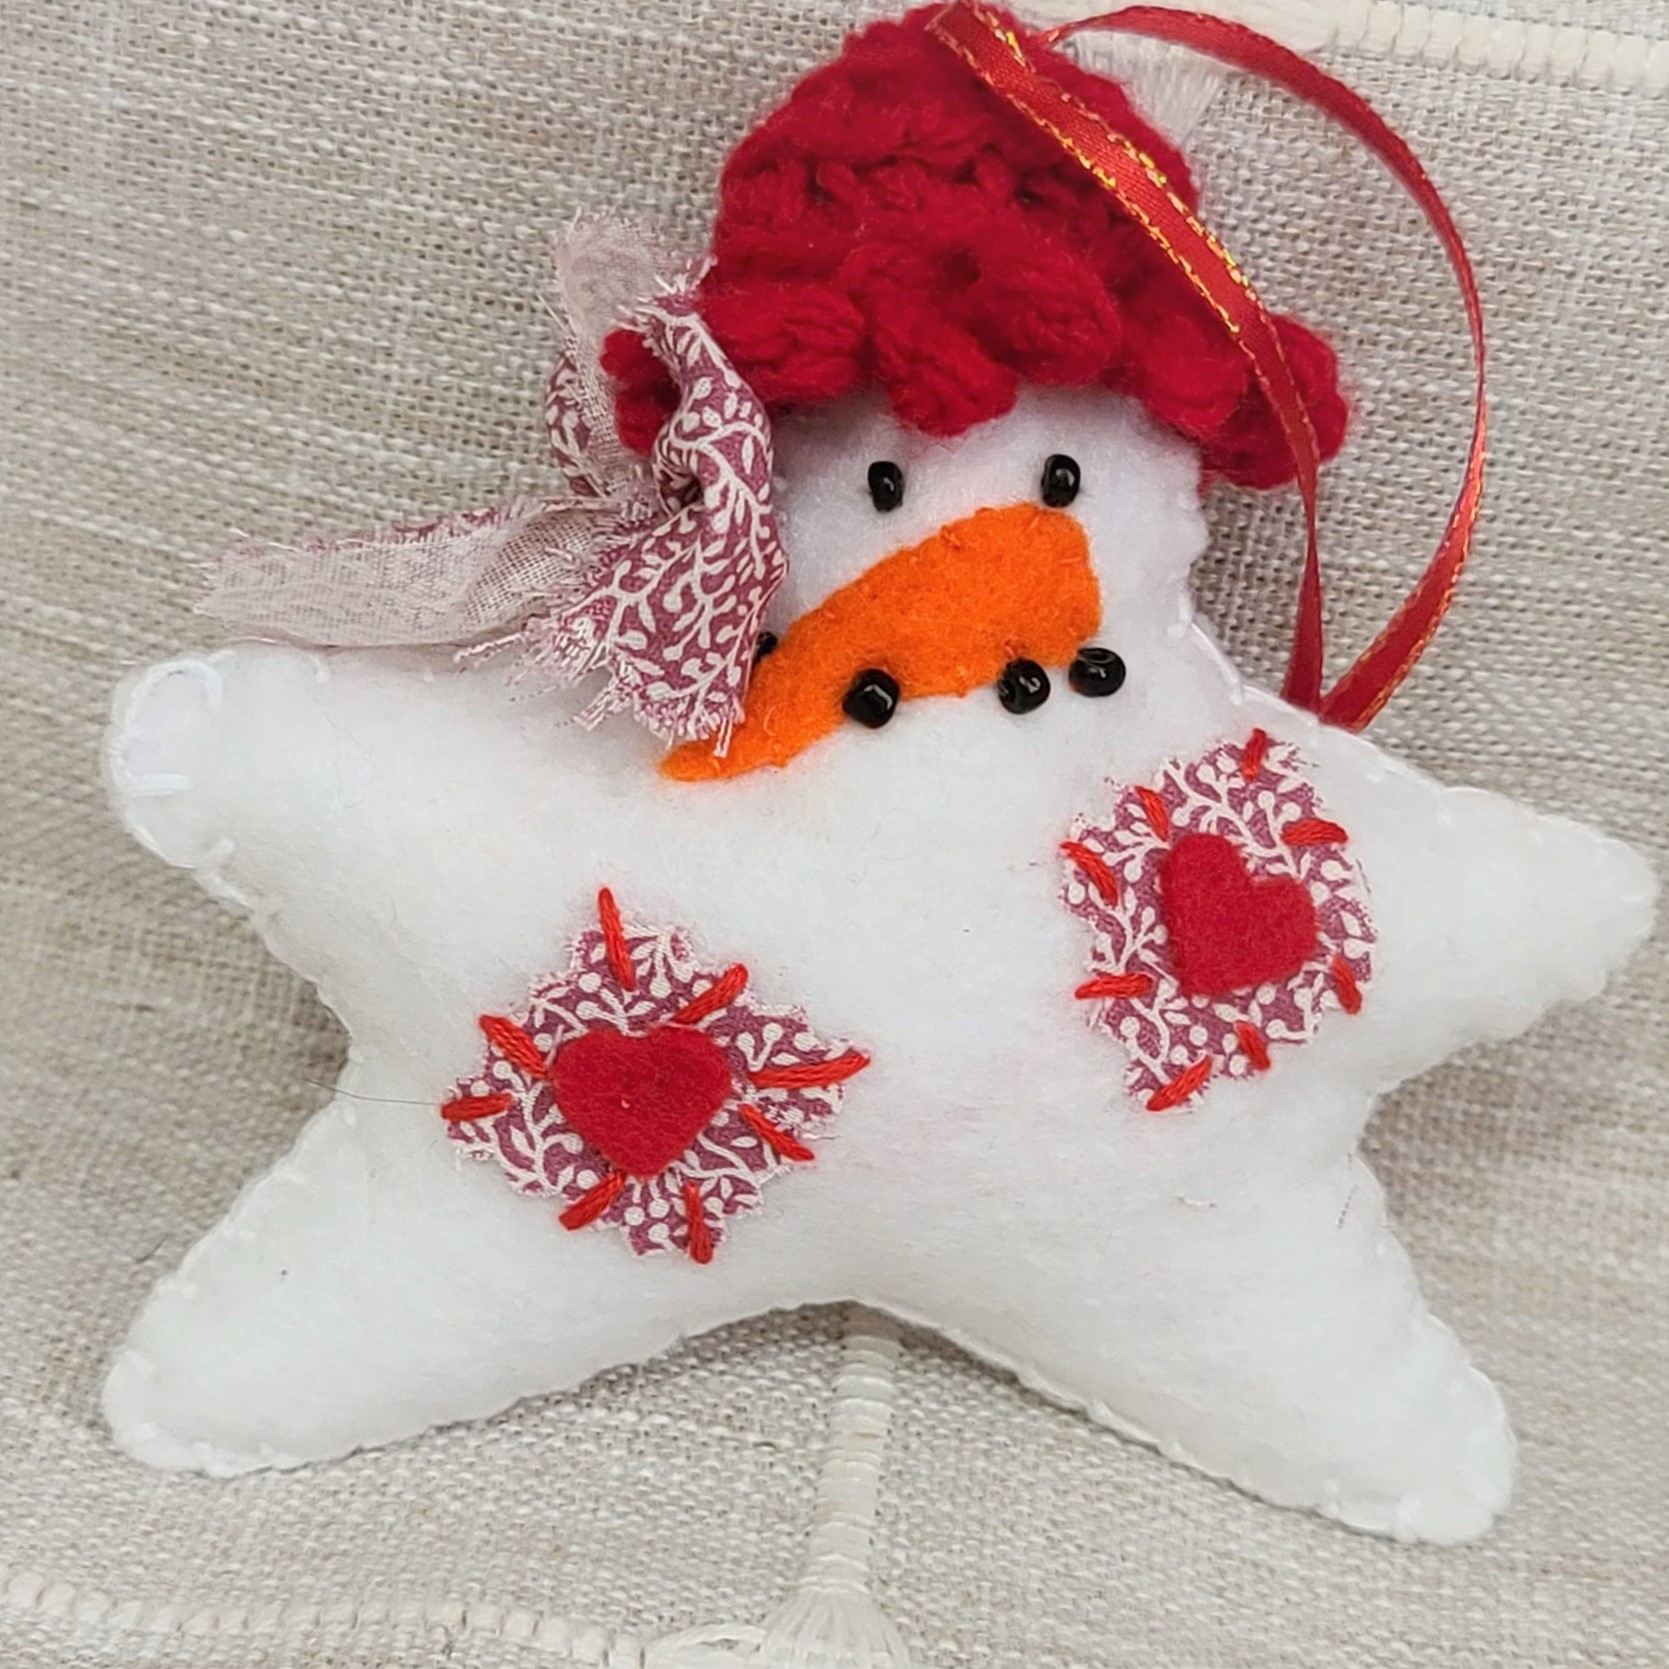 Felt Snowman star ornament with crochet hat -red patches and hat